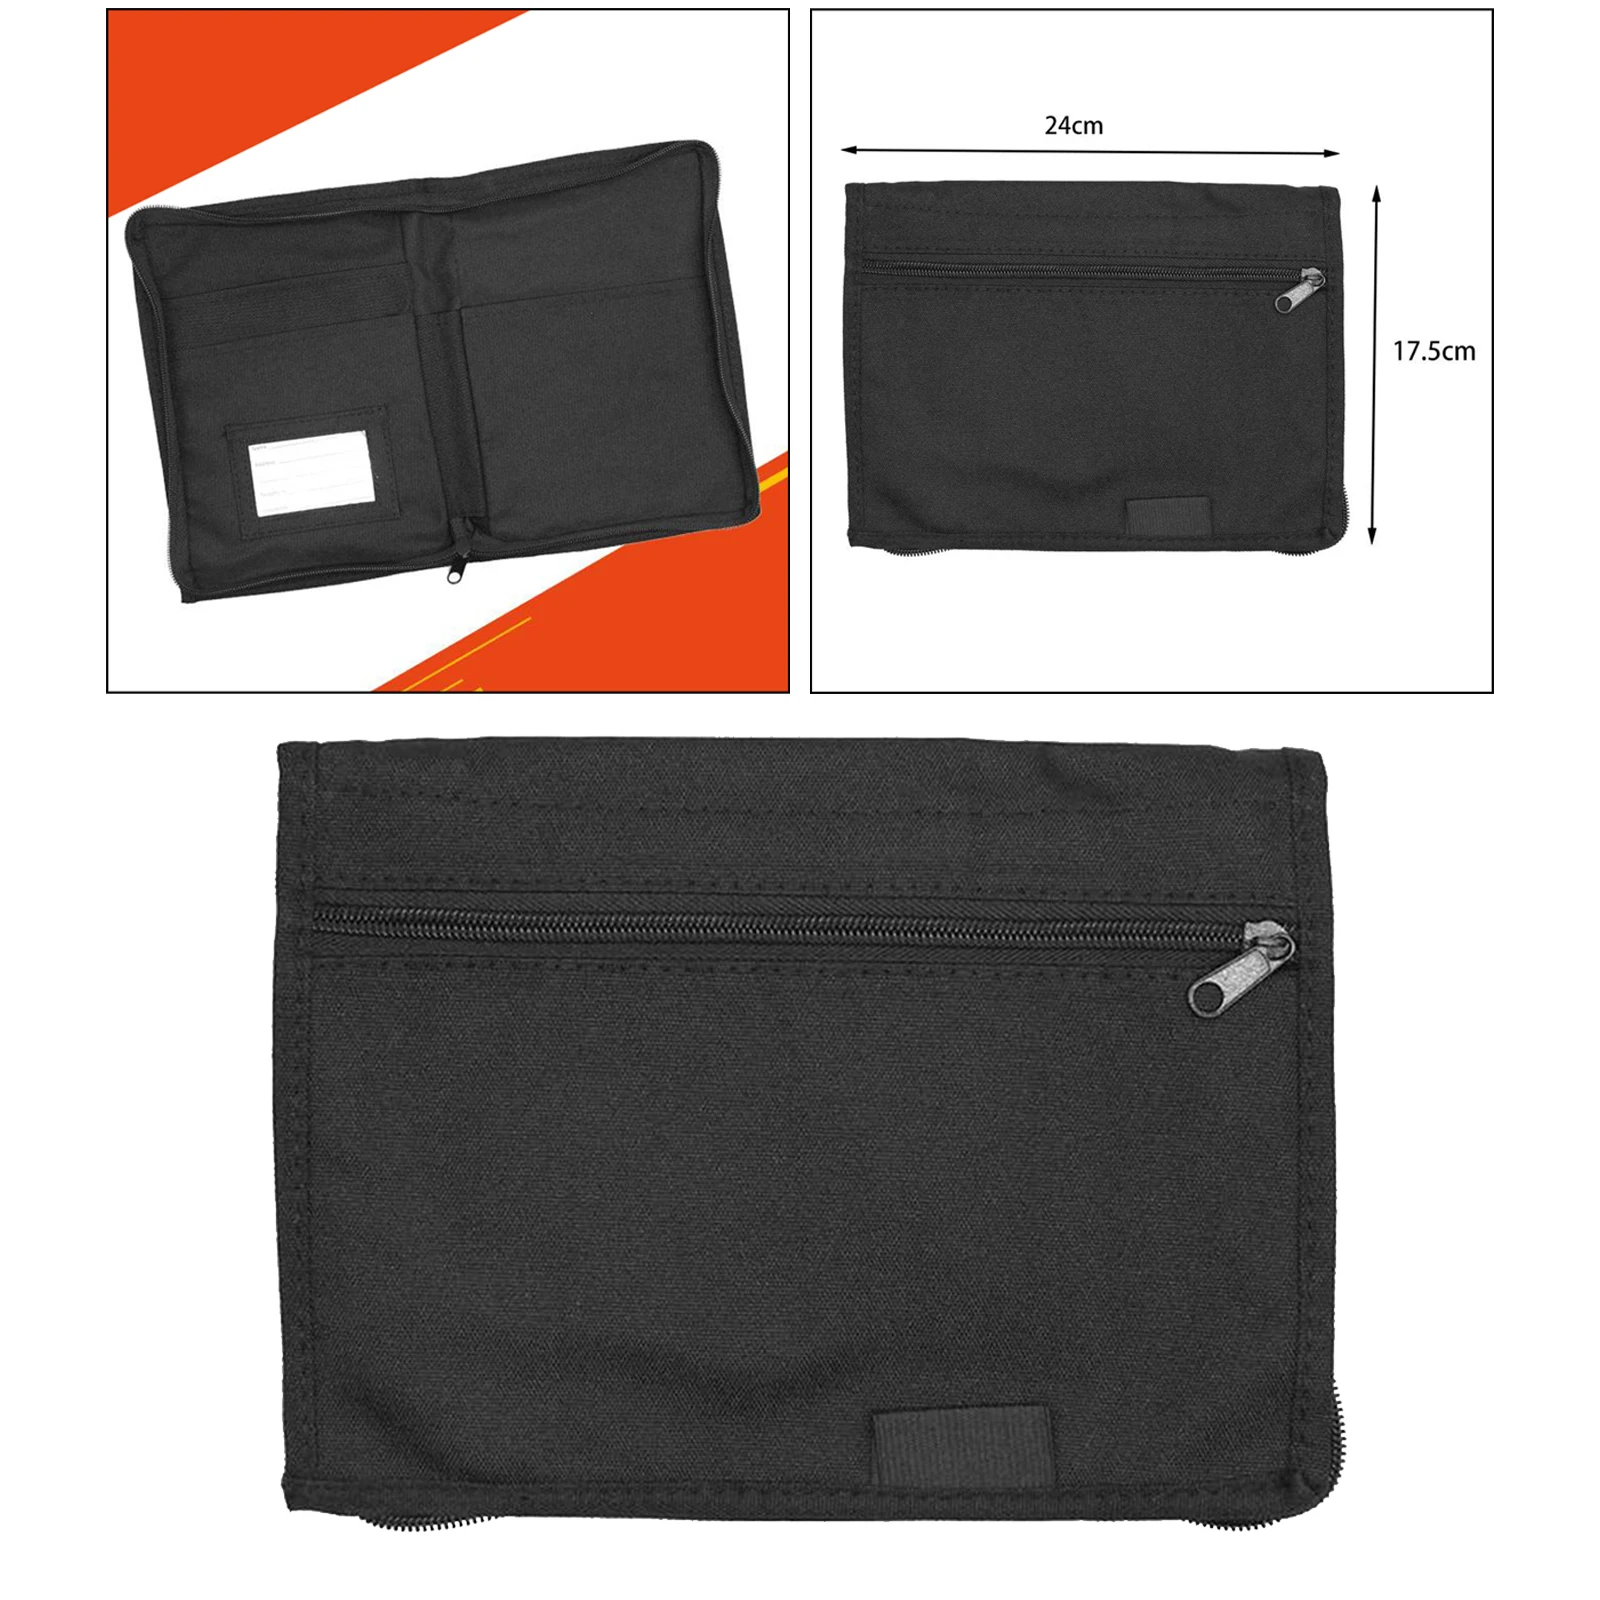 Car Registration and Insurance Documents Holder Vehicle Glove Box Wallet Case